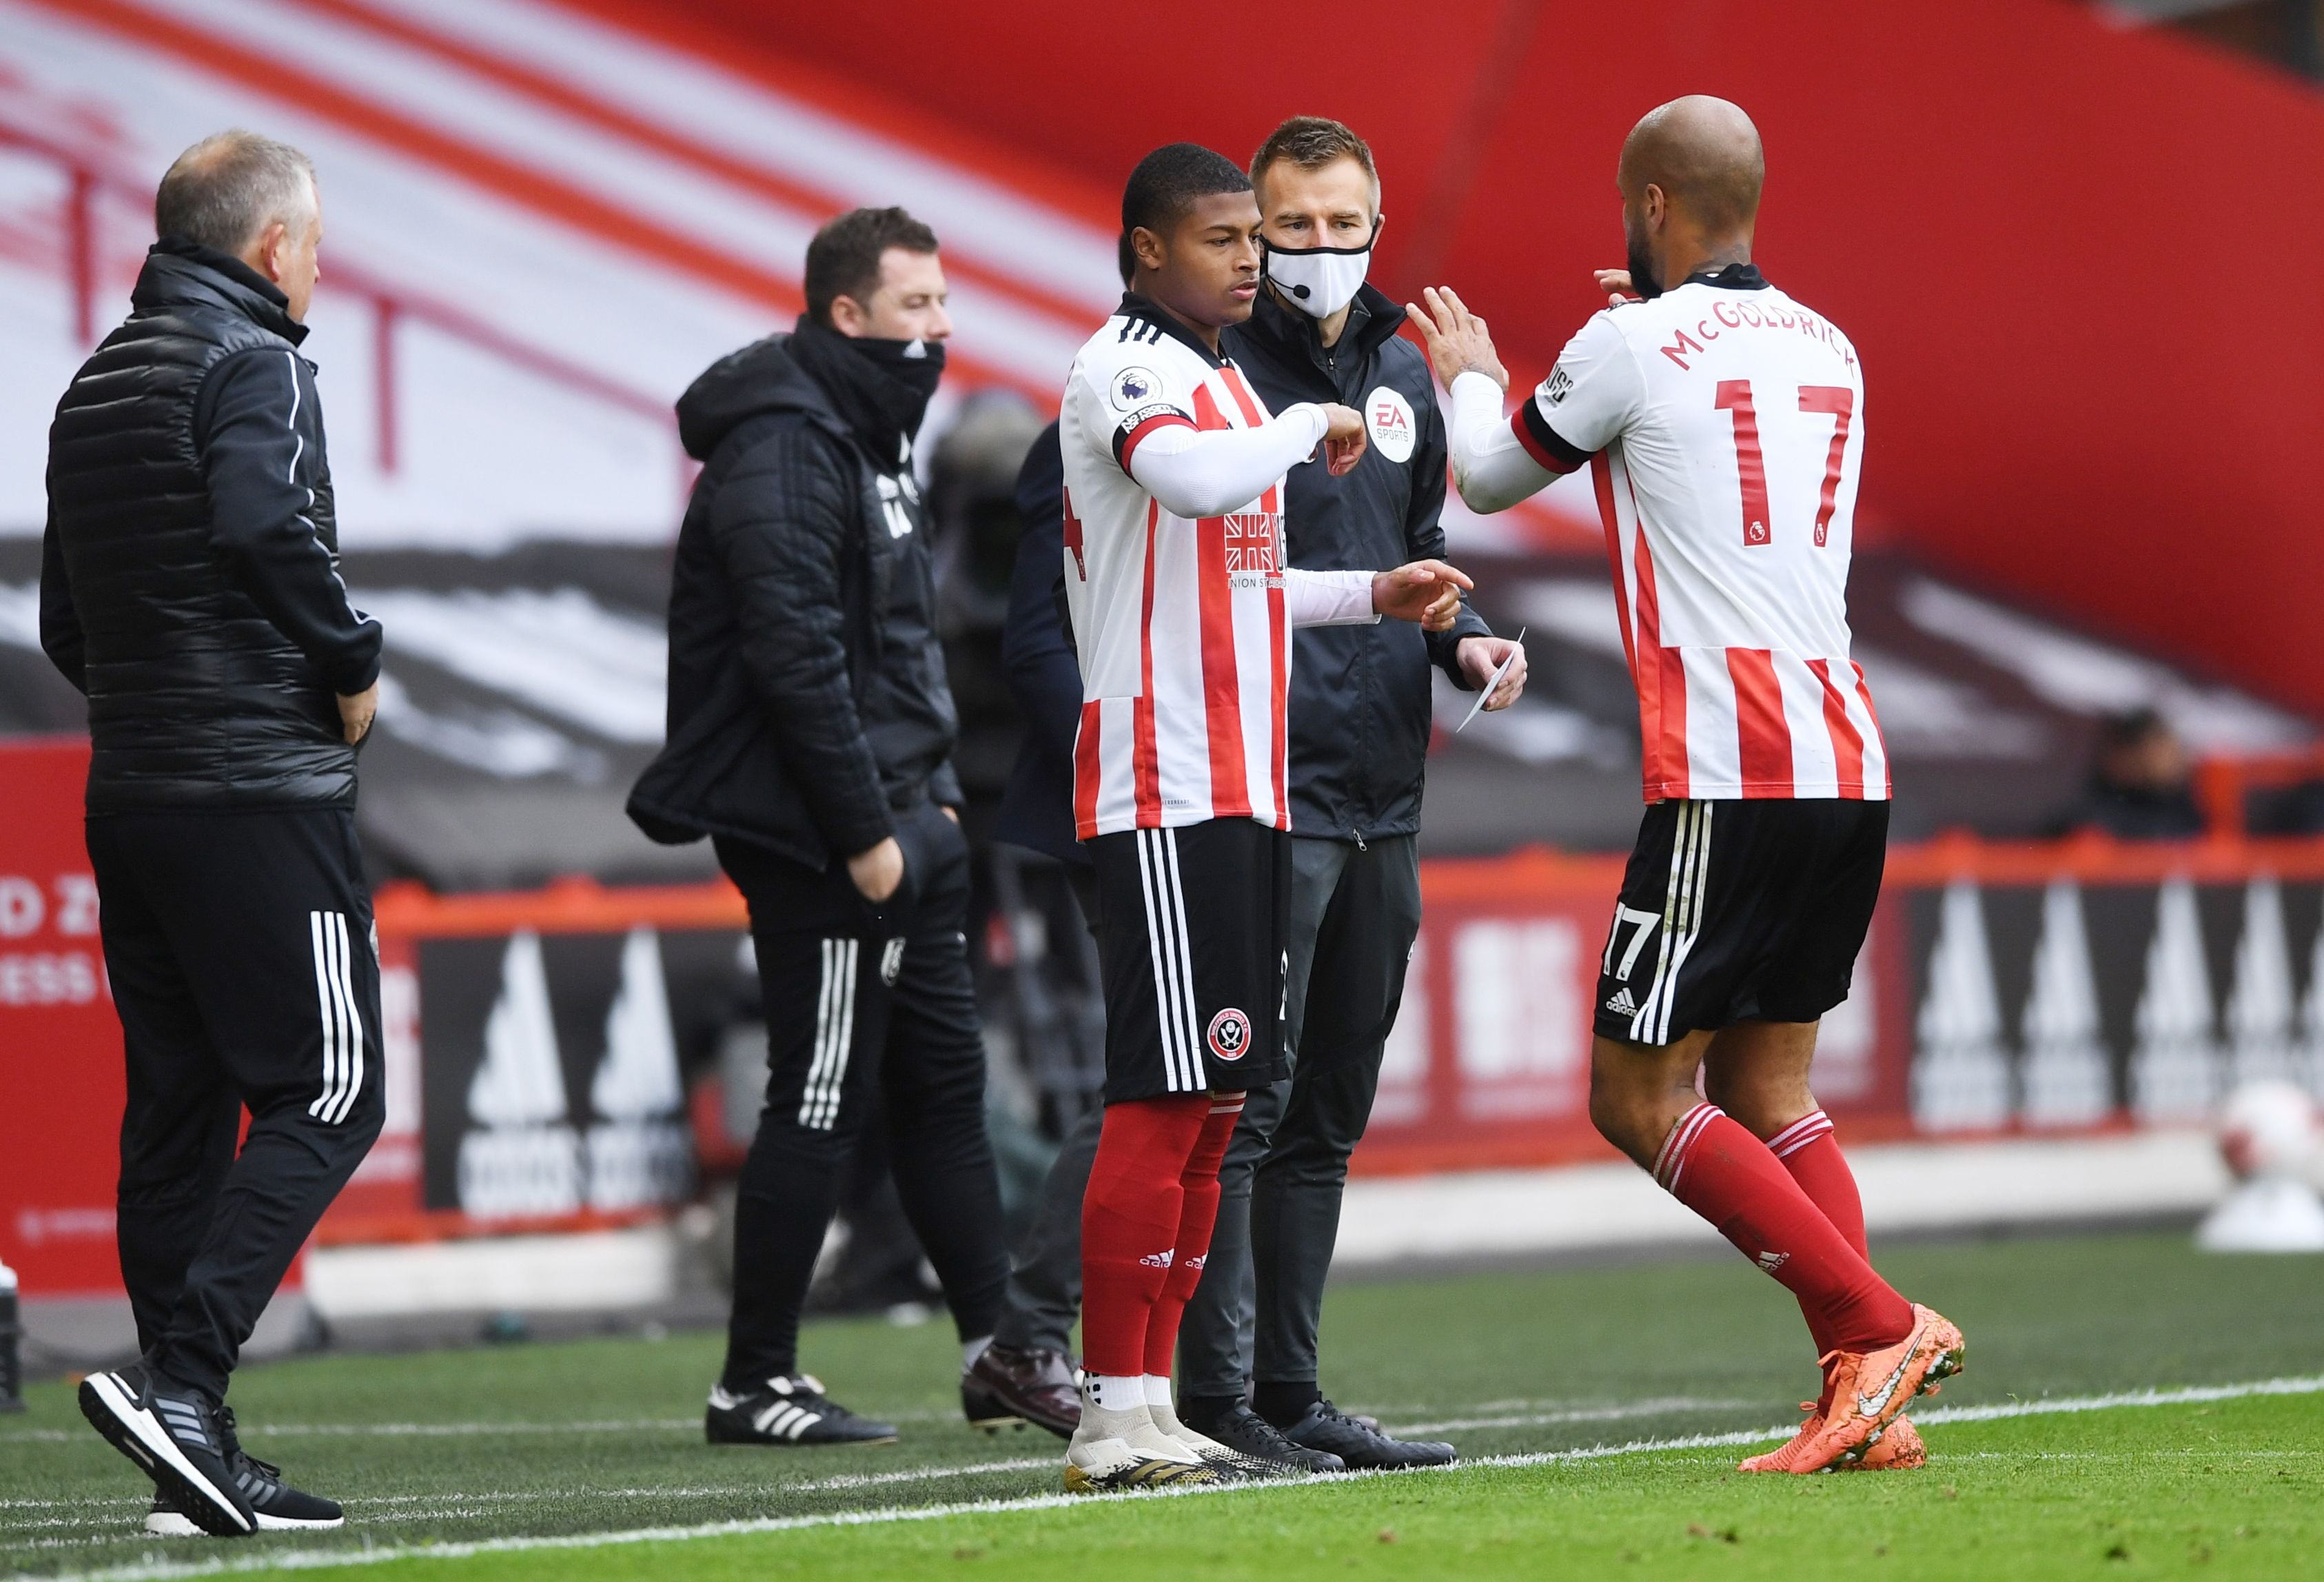 Sheffield United have struggled for goals so far this season